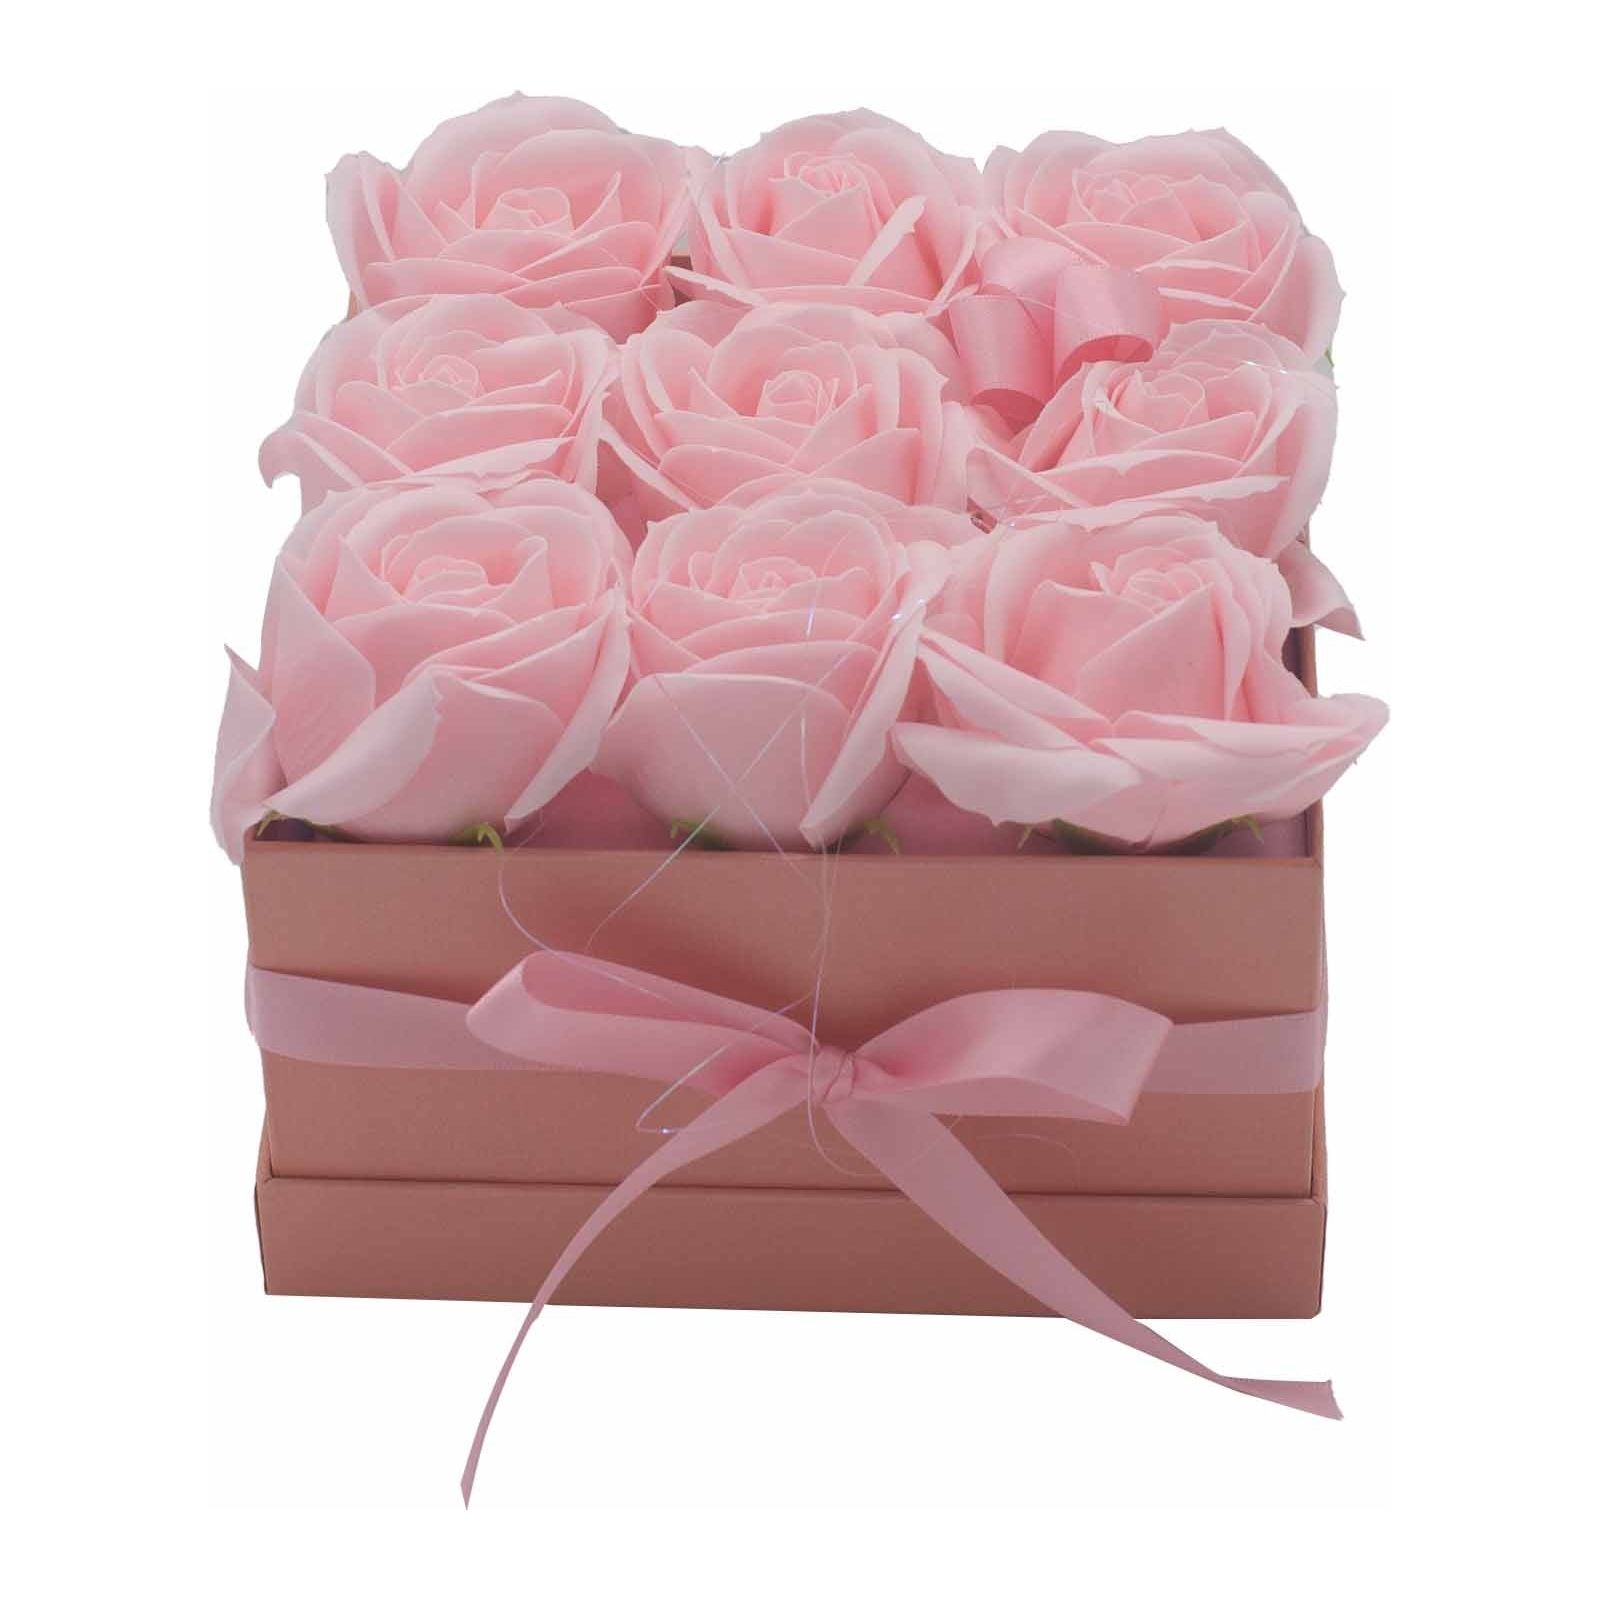 Soap Flower Gift Bouquet - 9 Pink Roses - Square - Ashton and Finch